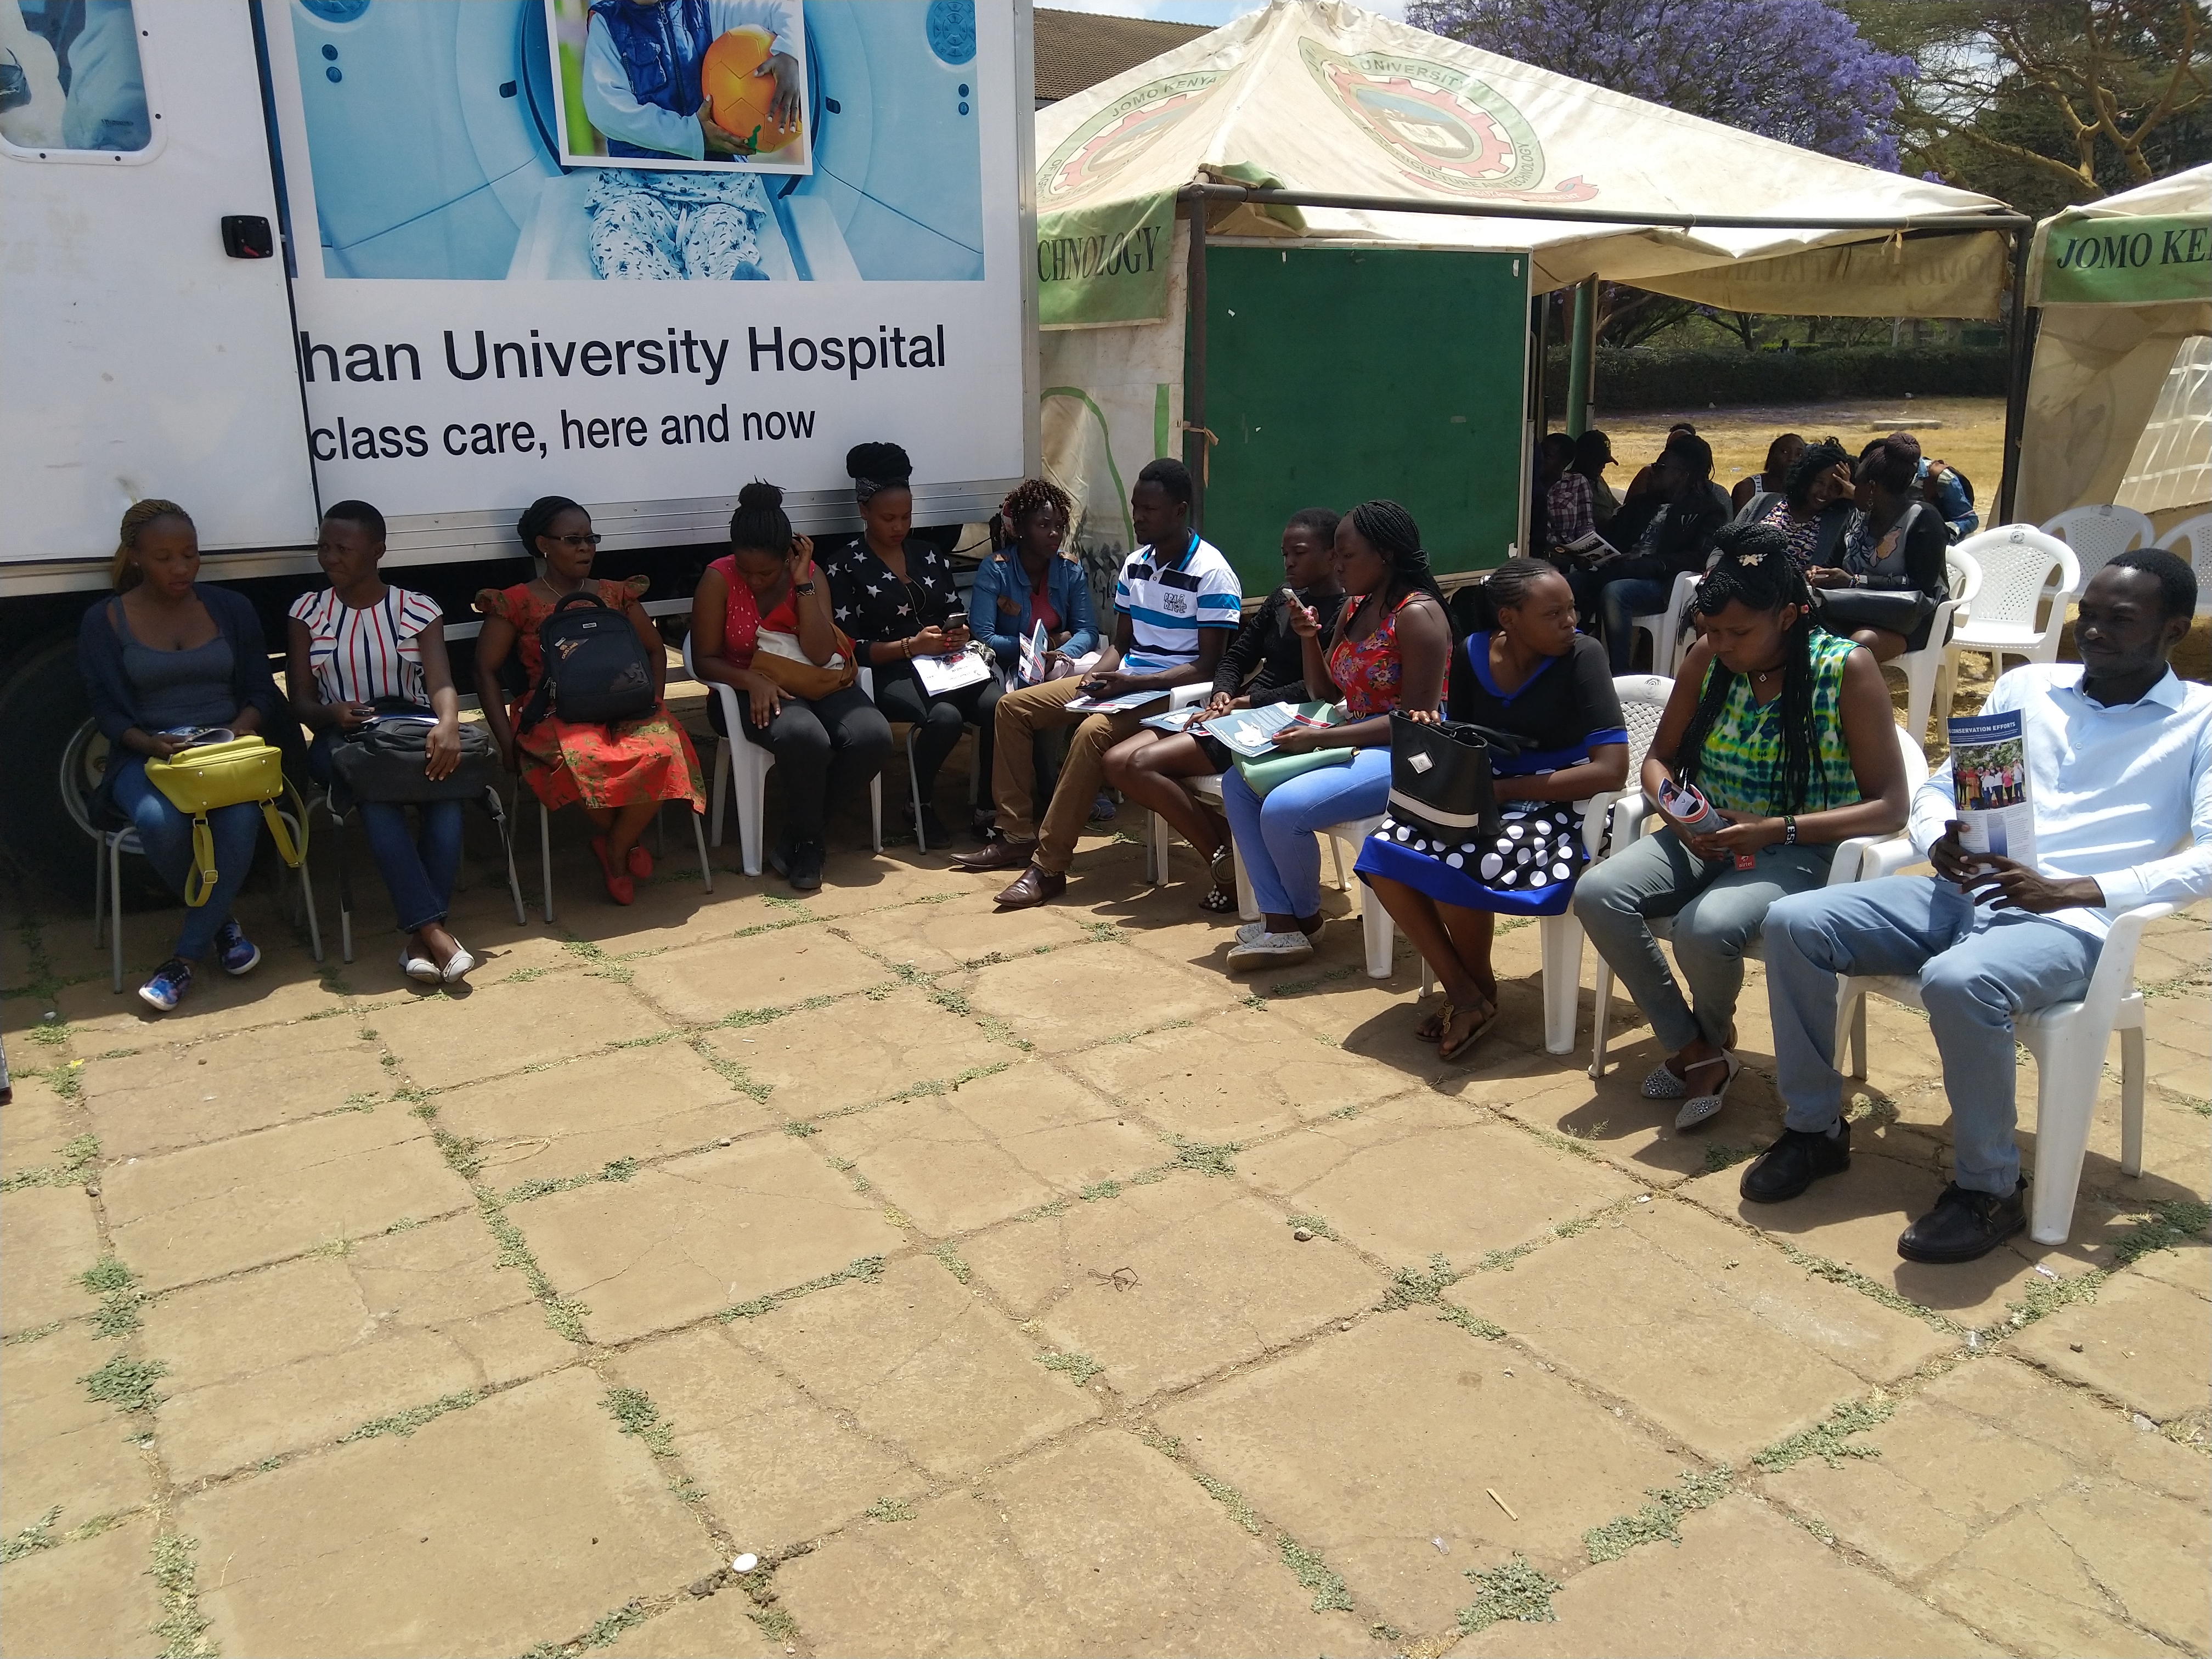 Students waiting to undergo Cancer screening at the health drive.